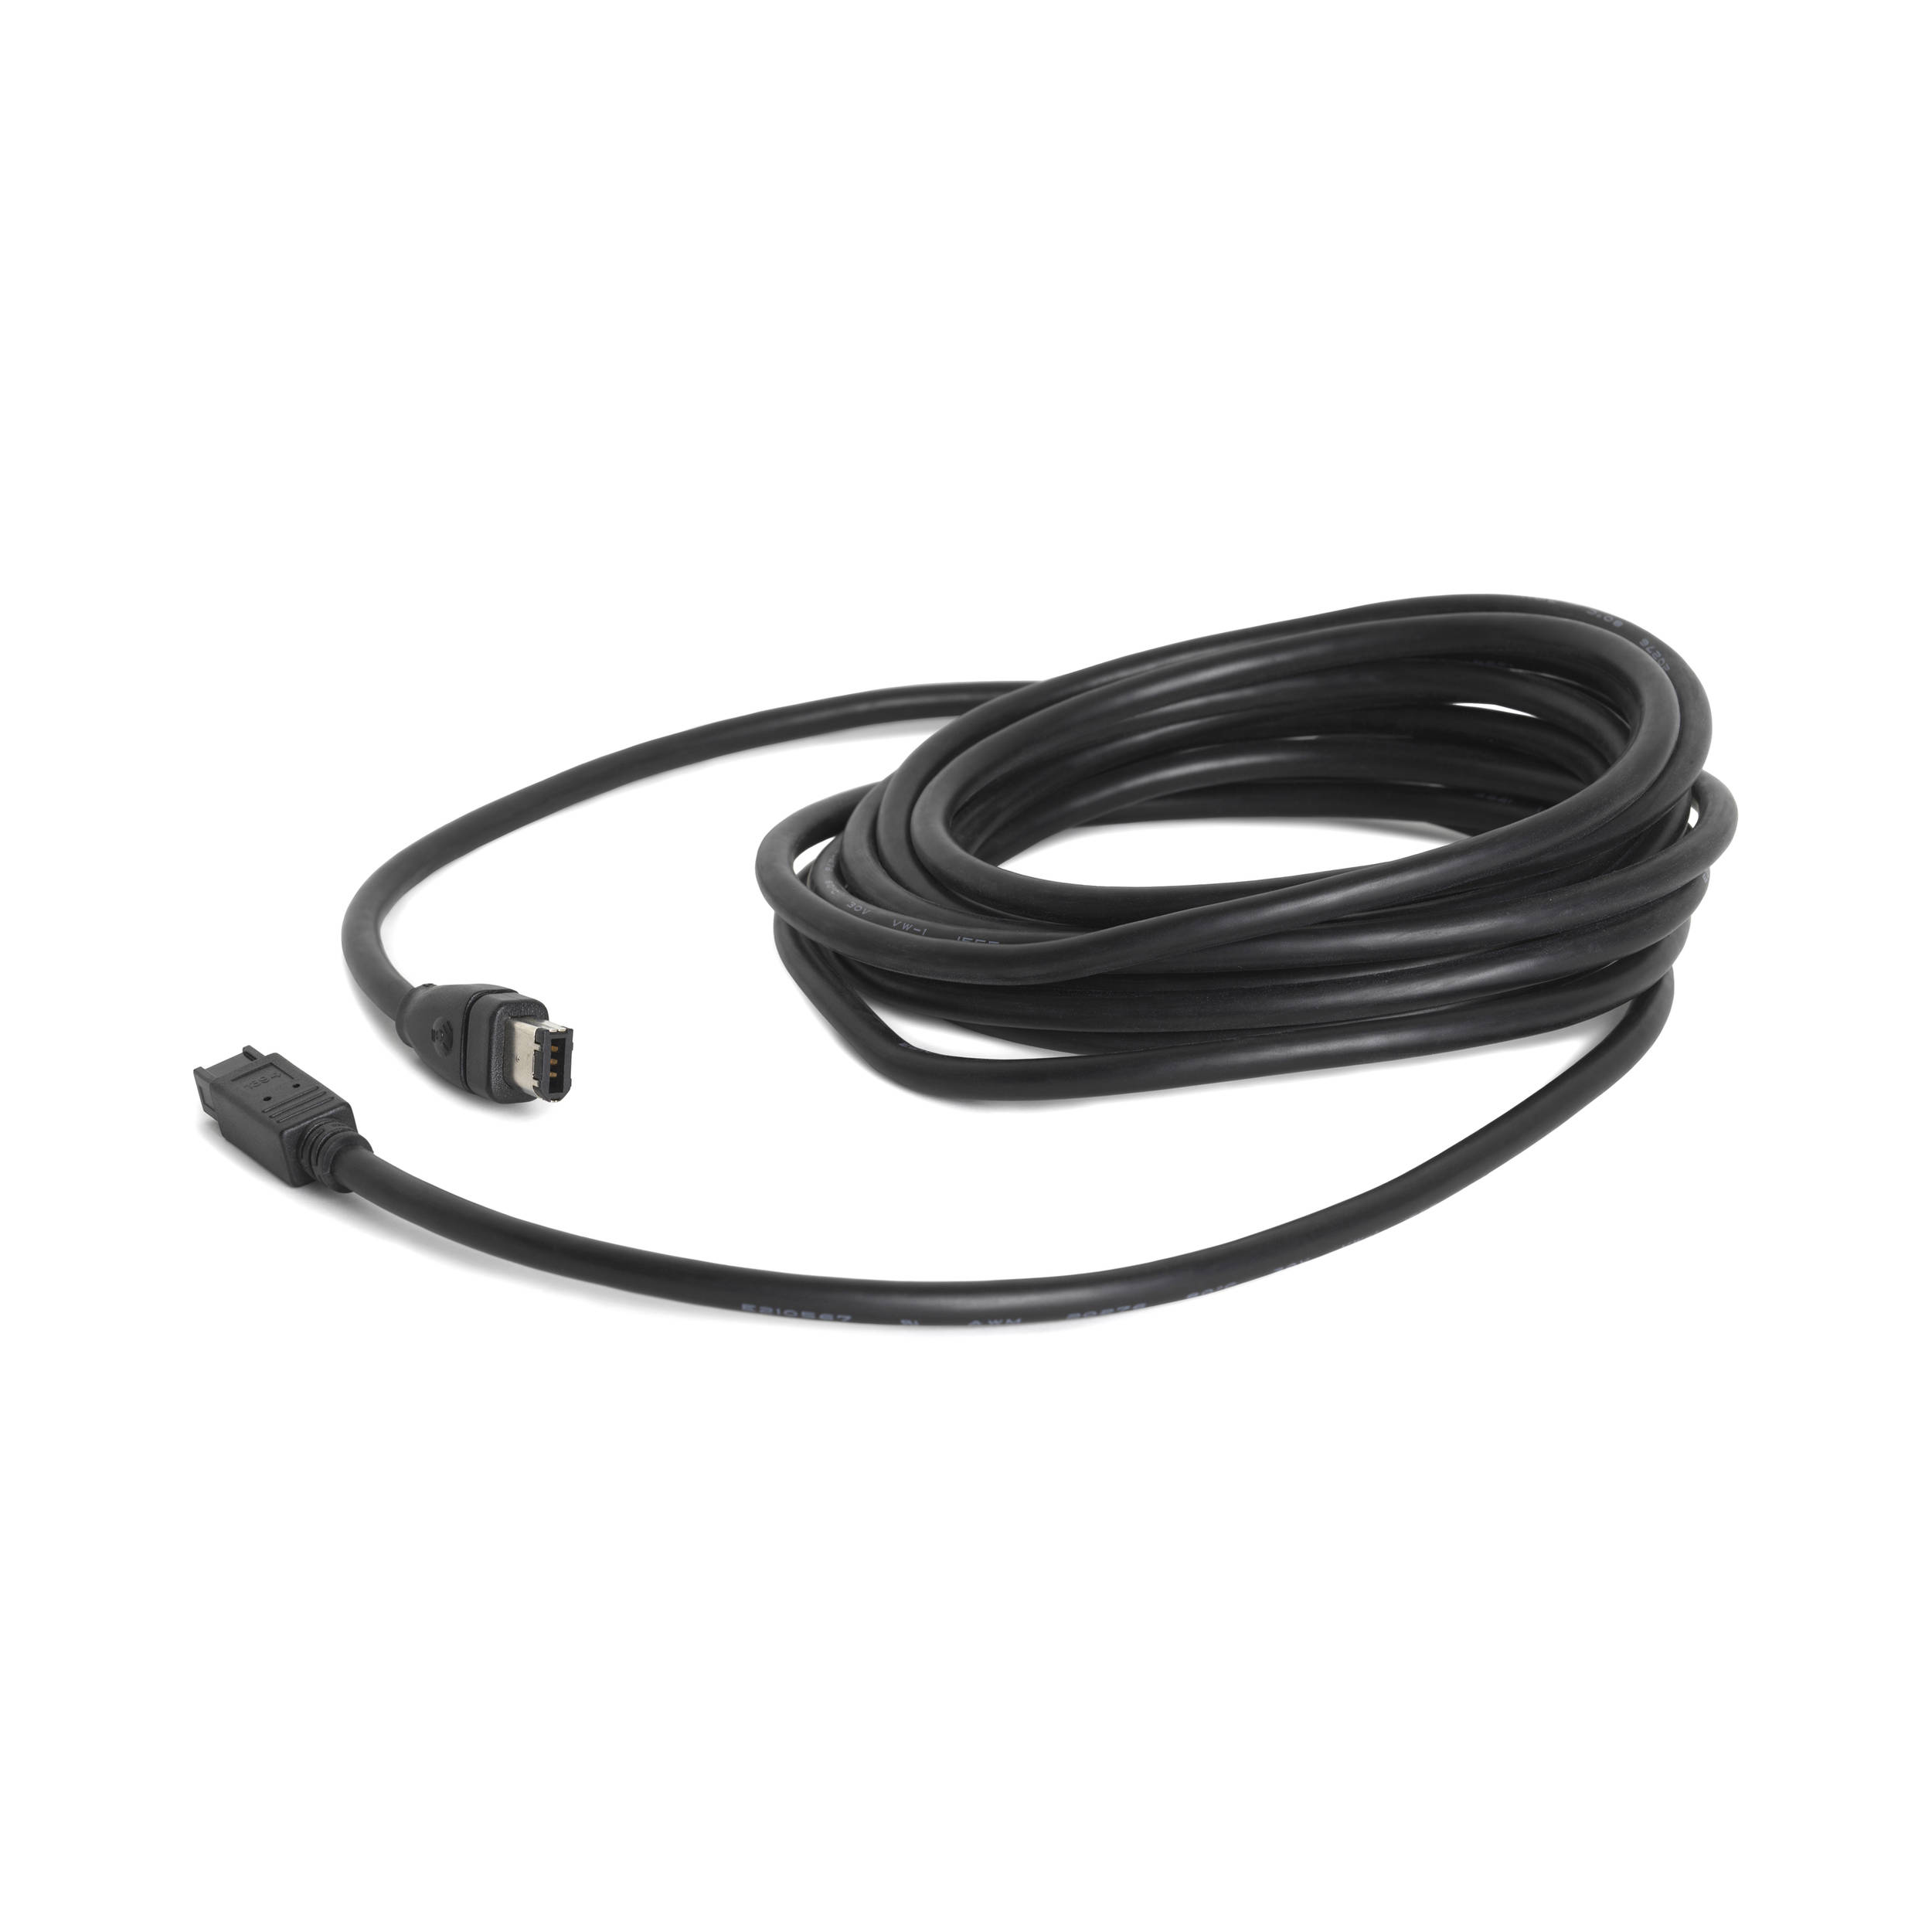 Hasselblad FireWire 400 to 800 Cable (14')